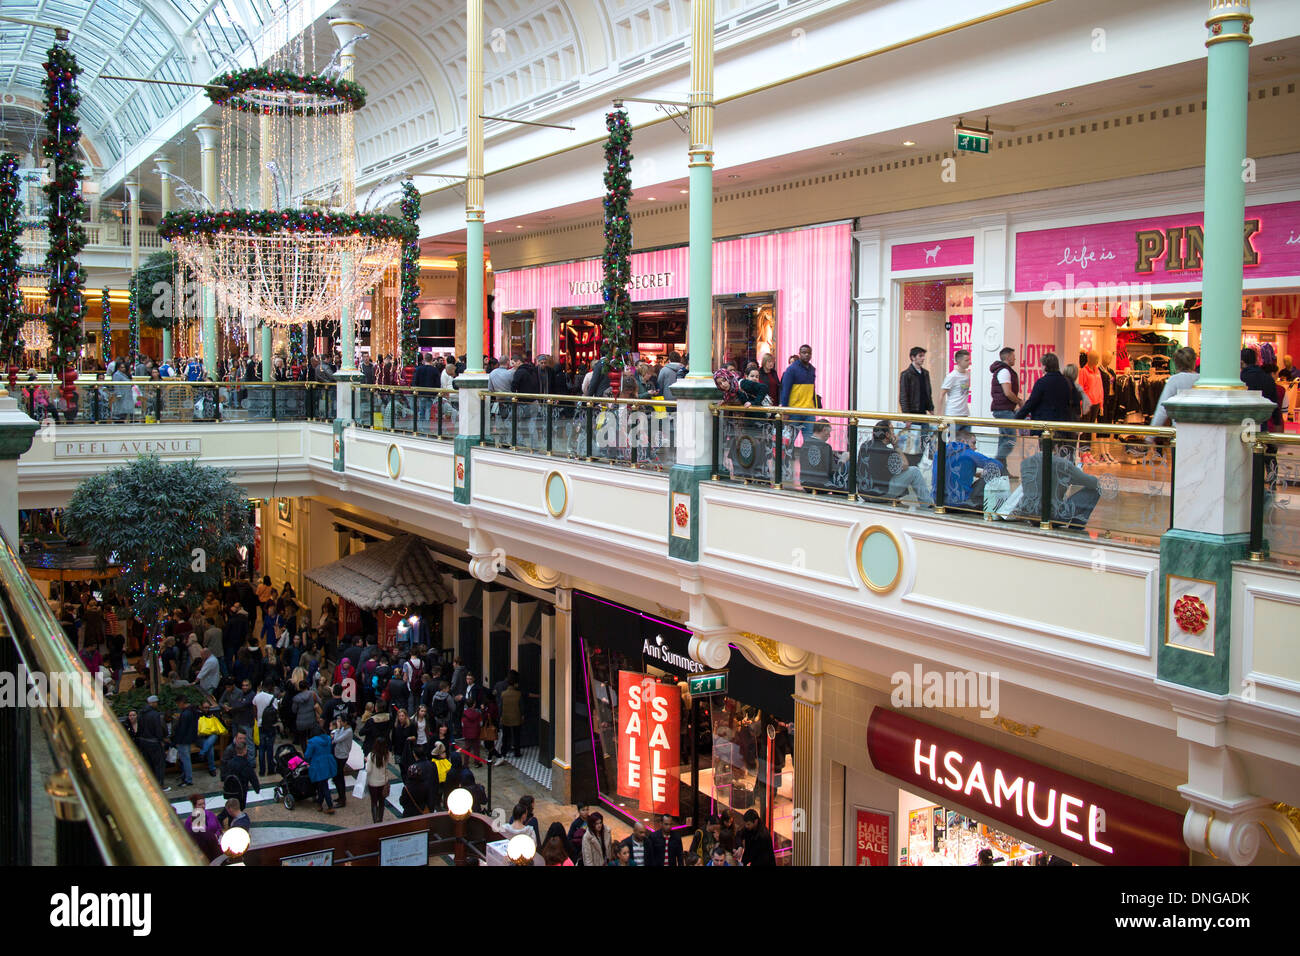 Inside the Intu Trafford Centre indoor shopping complex in Dumplington, Greater Manchester, England Stock Photo